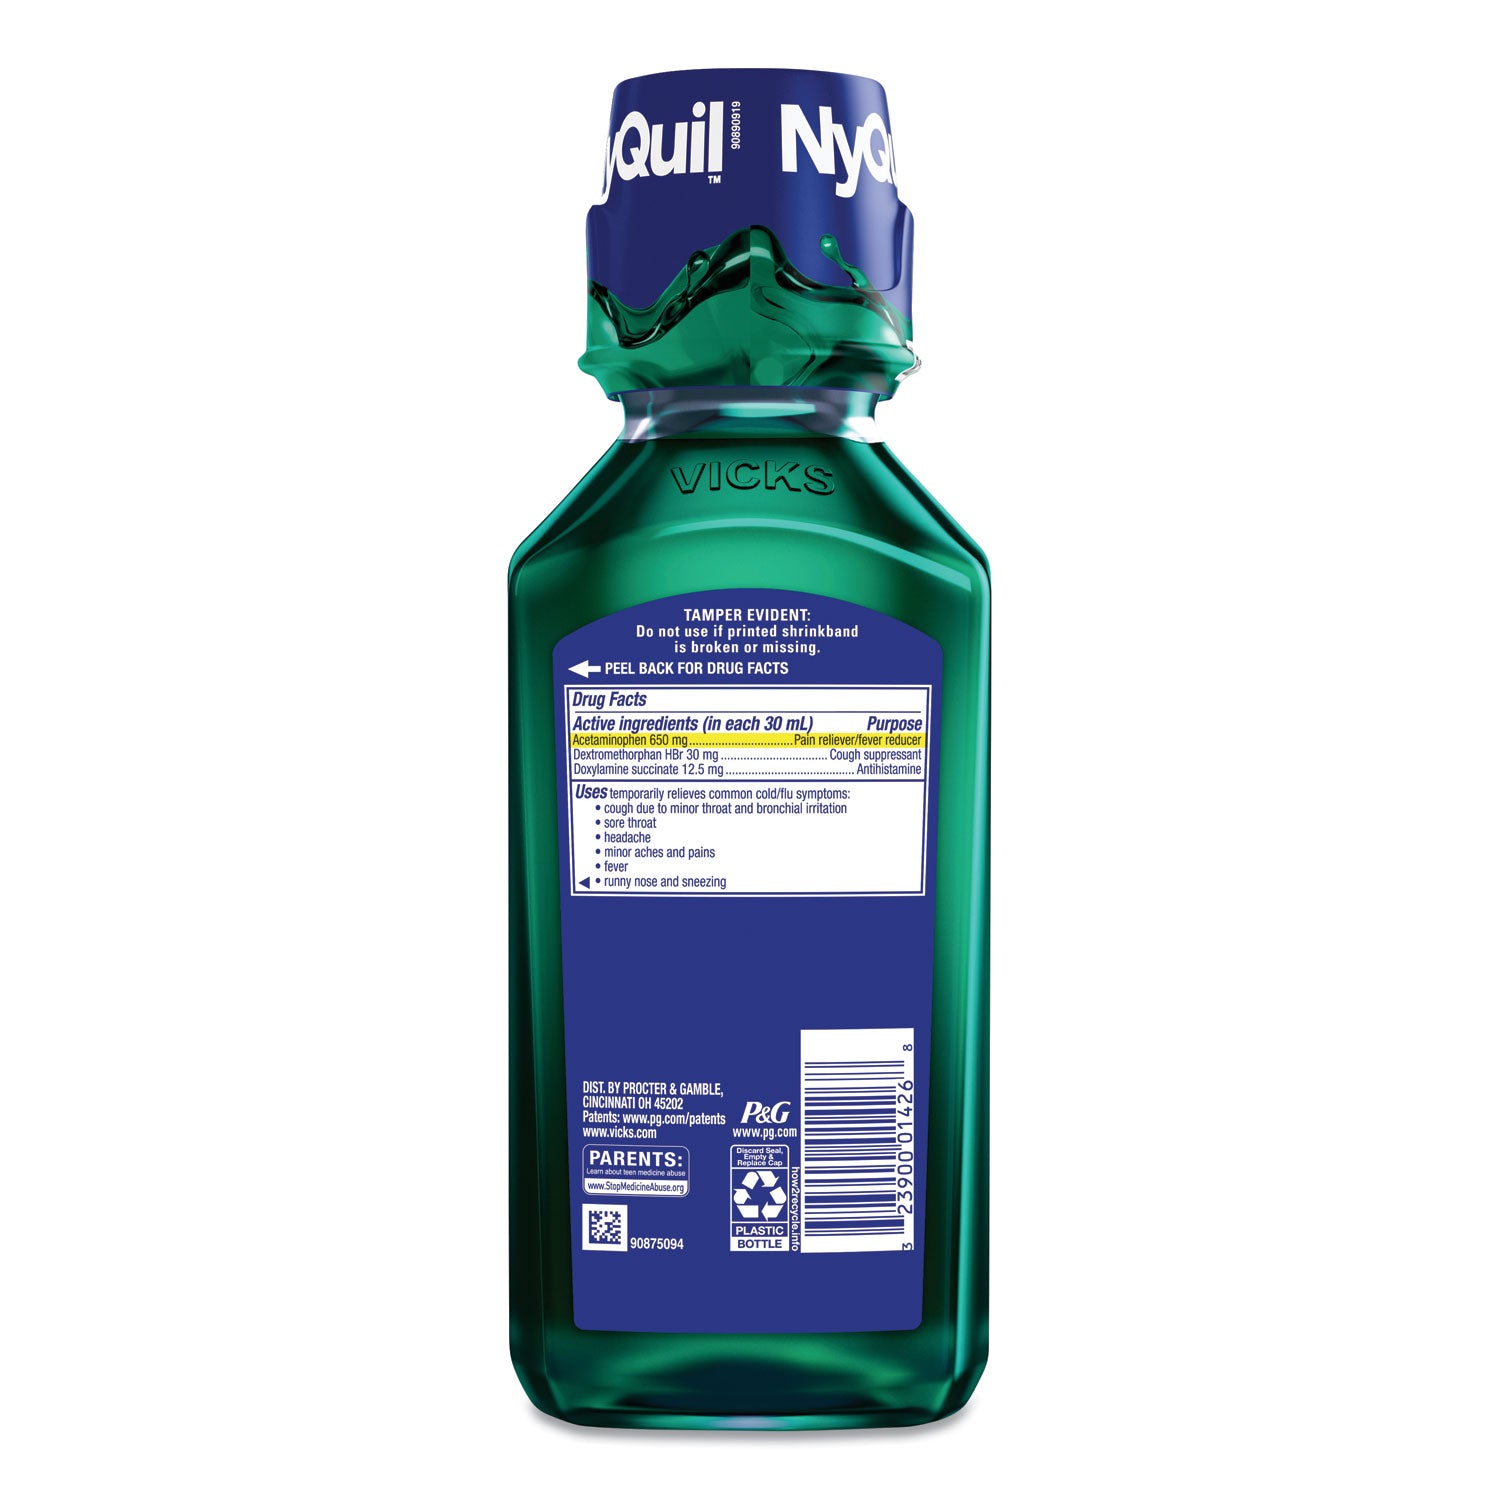 nyquil-cold-and-flu-nighttime-liquid-12-oz-bottle-12-carton_pgc01426 - 2